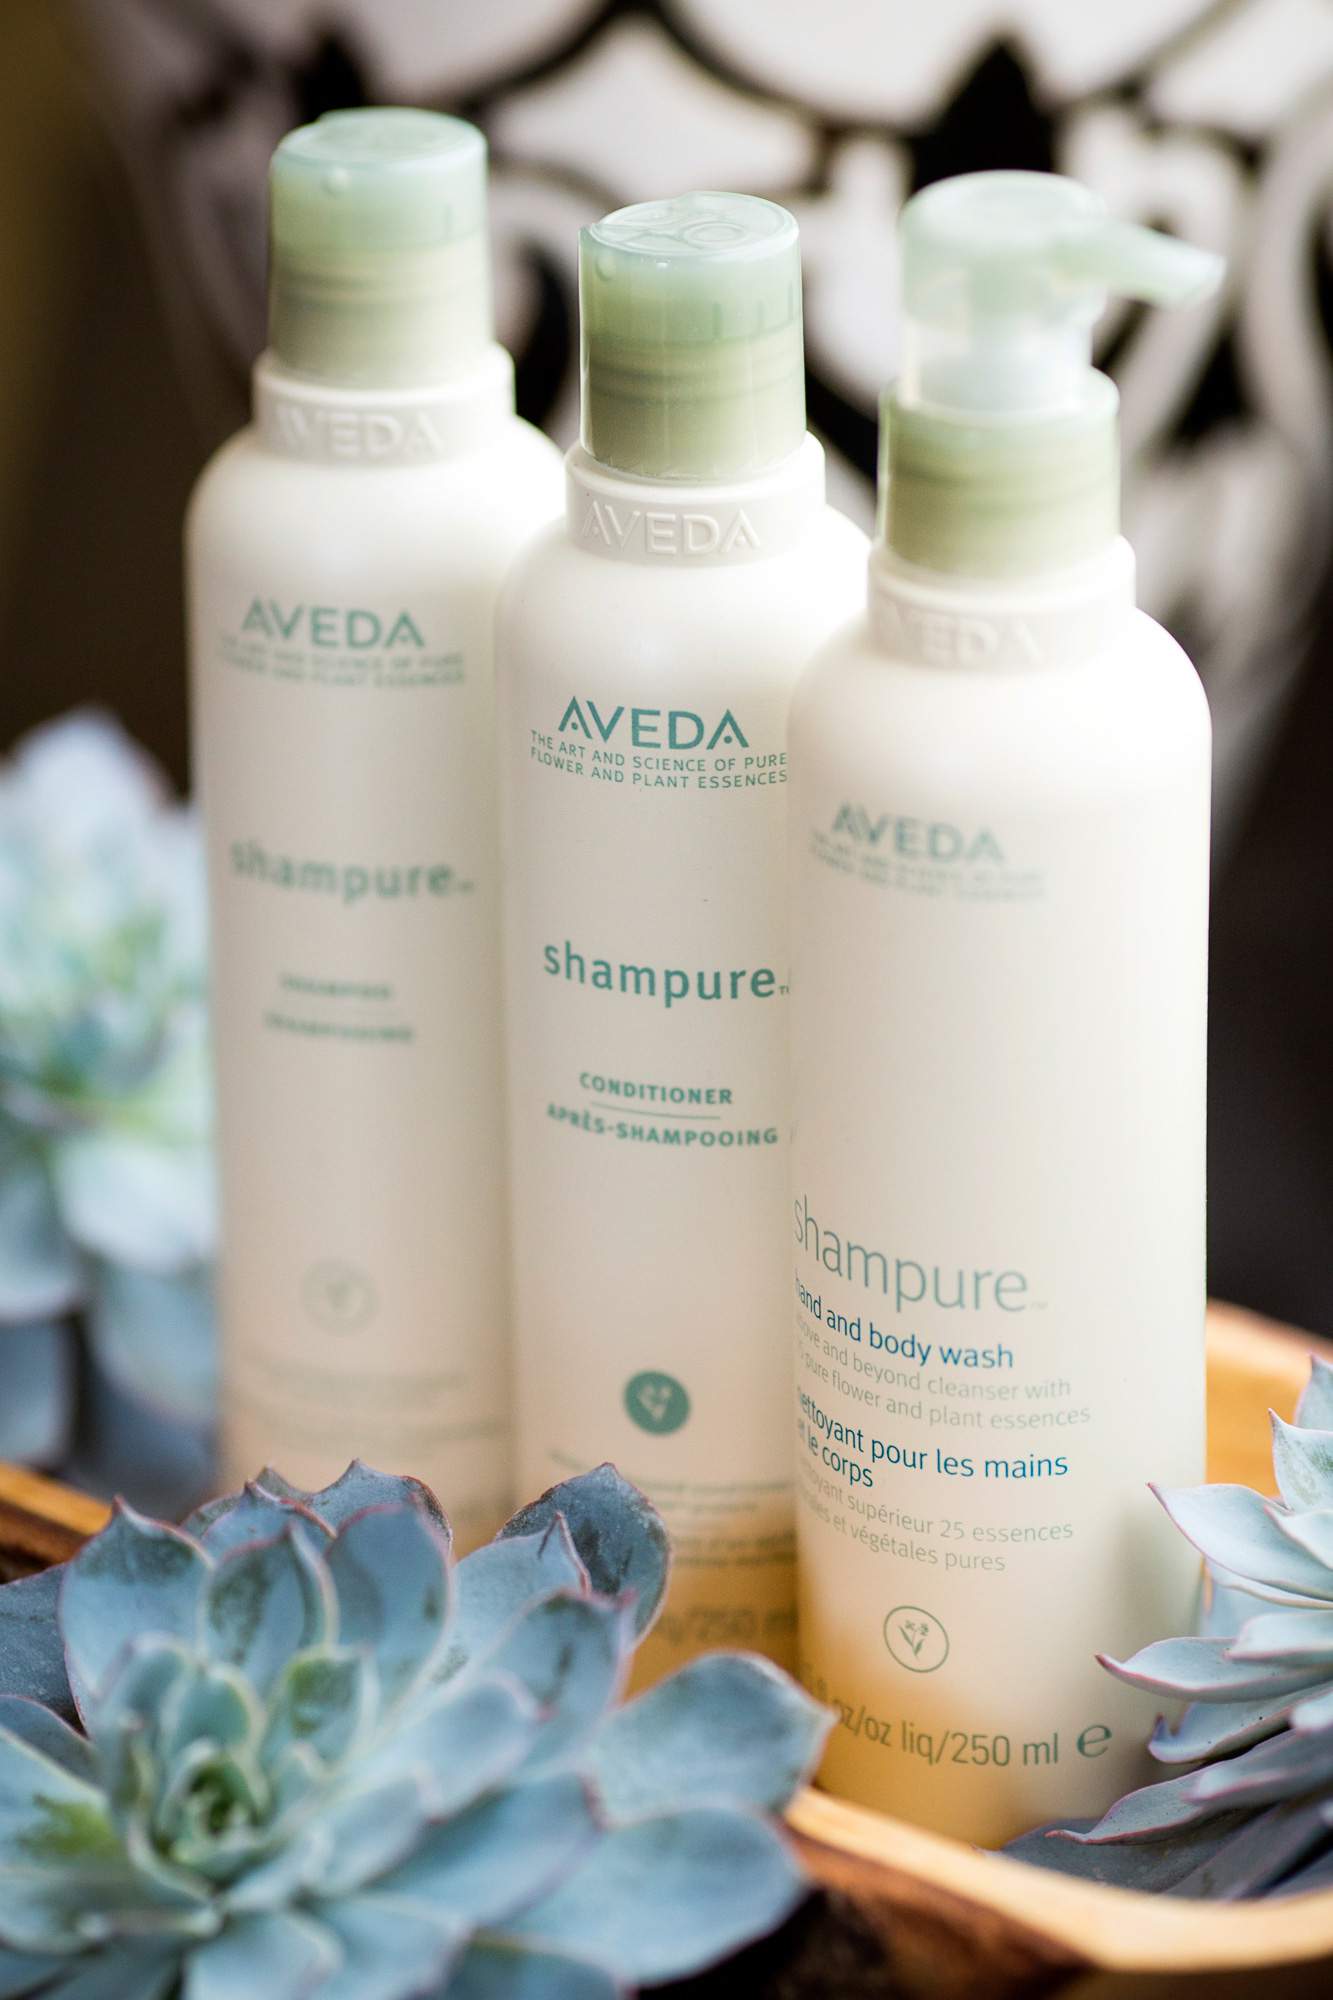 Aveda Shampure avaliable - Rapunzels Salon and Spa - Canmore